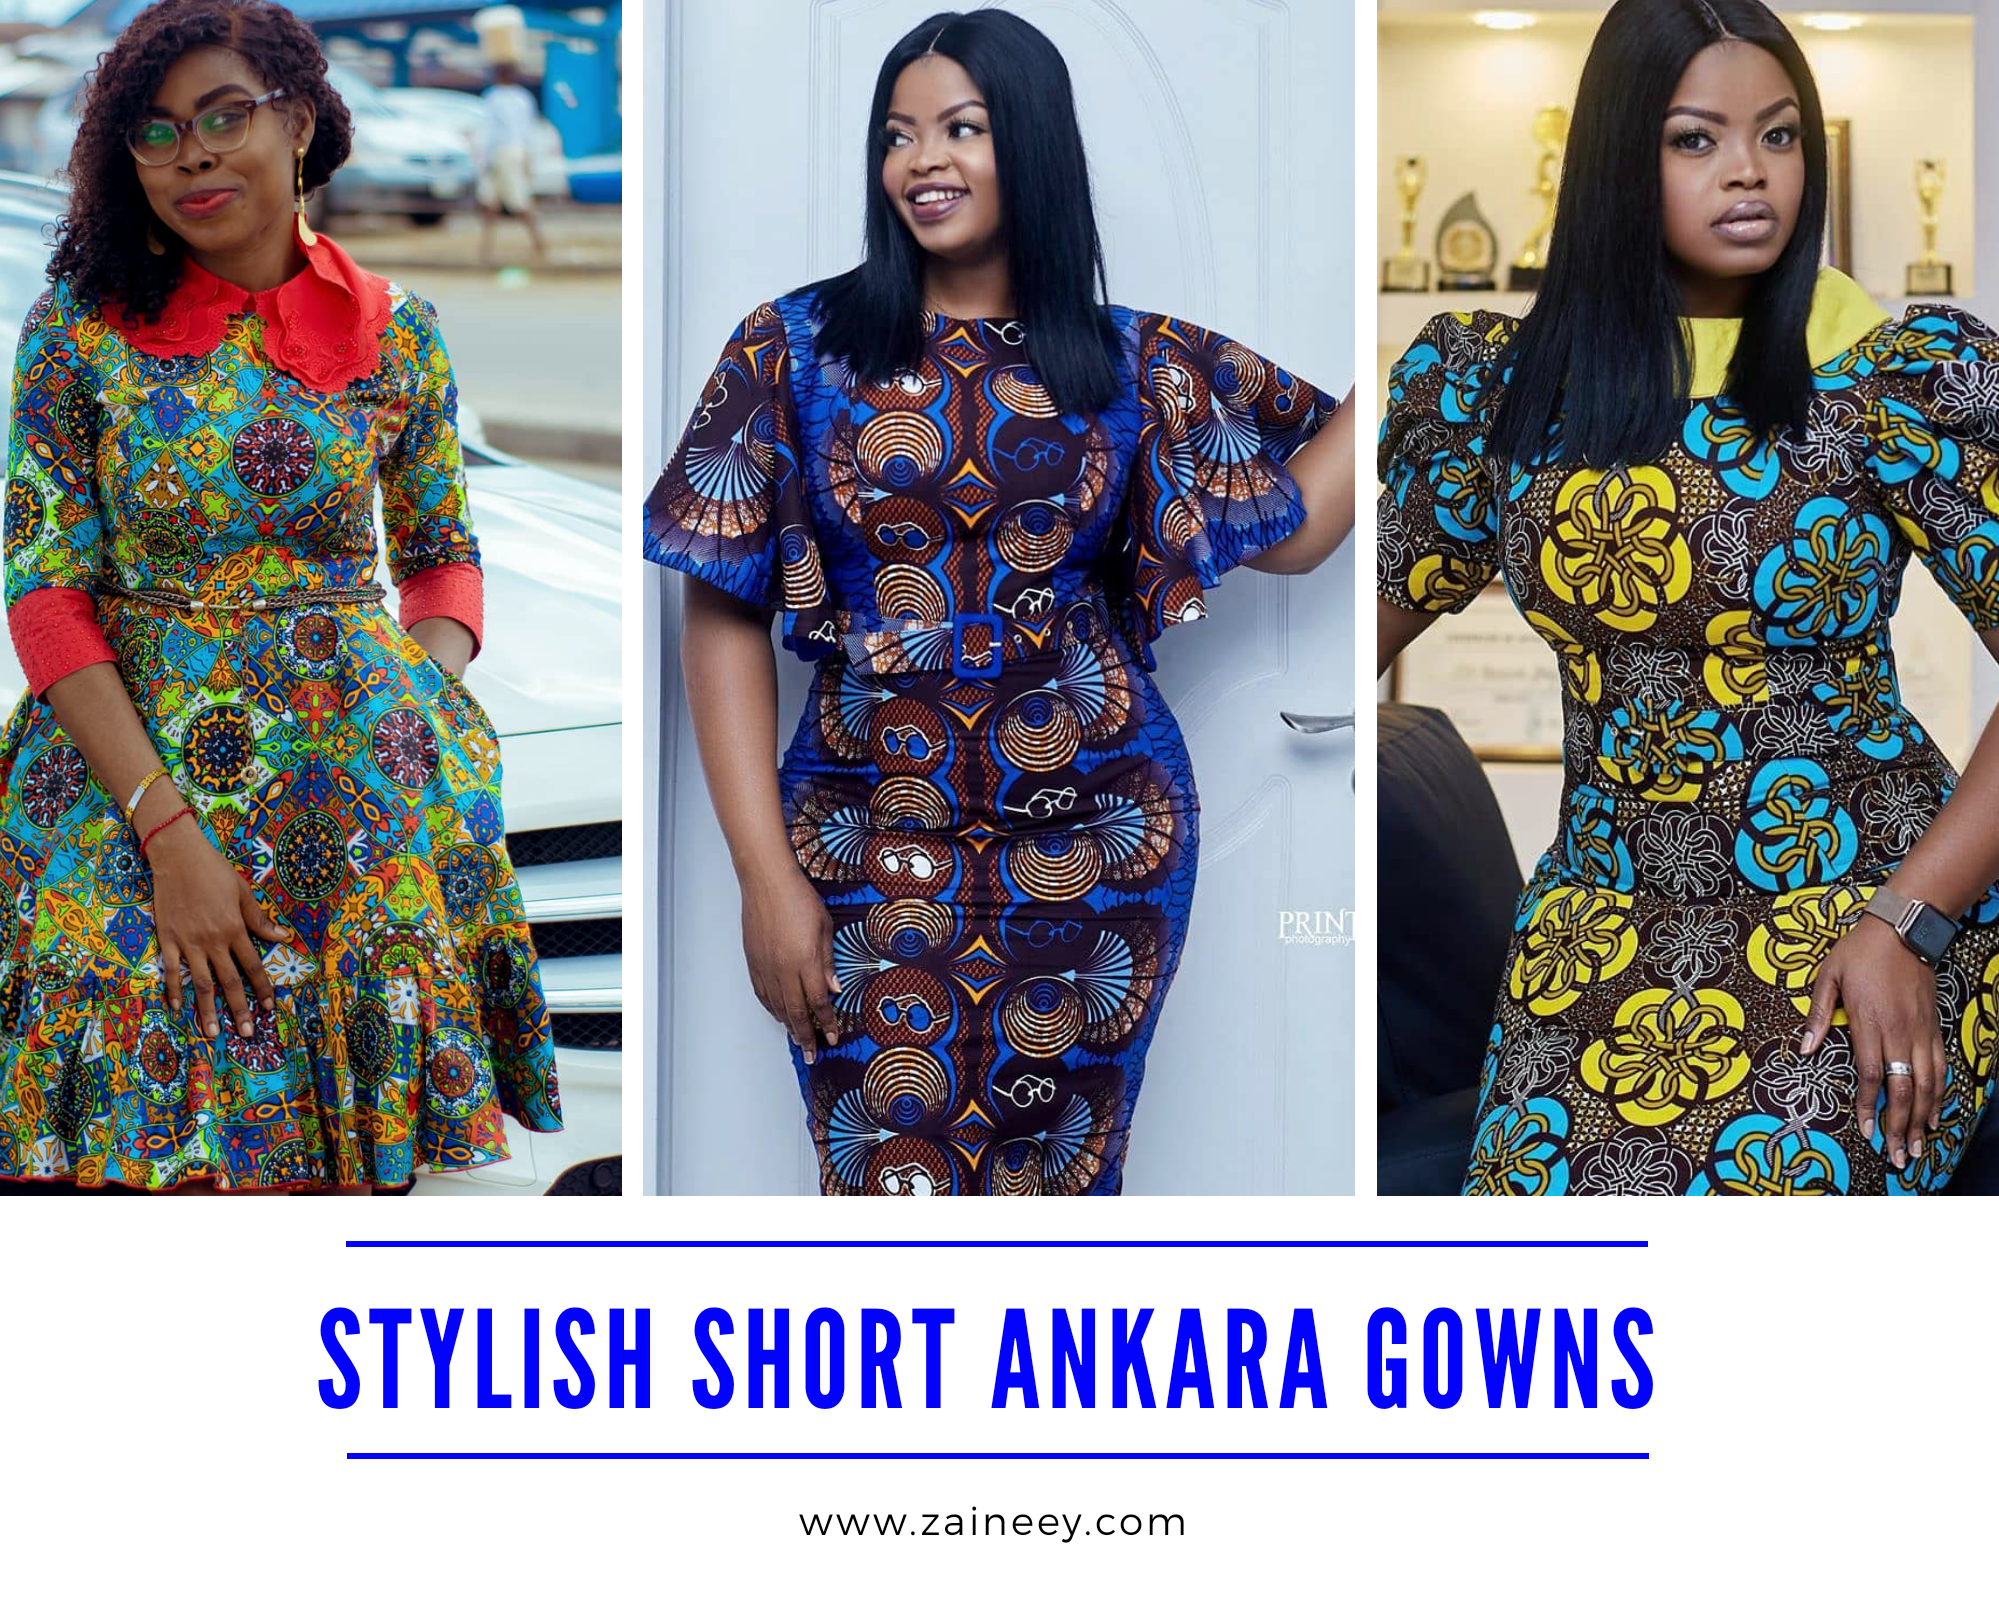 Creative, Trendy, and Stylish Short Ankara Gowns for Ladies